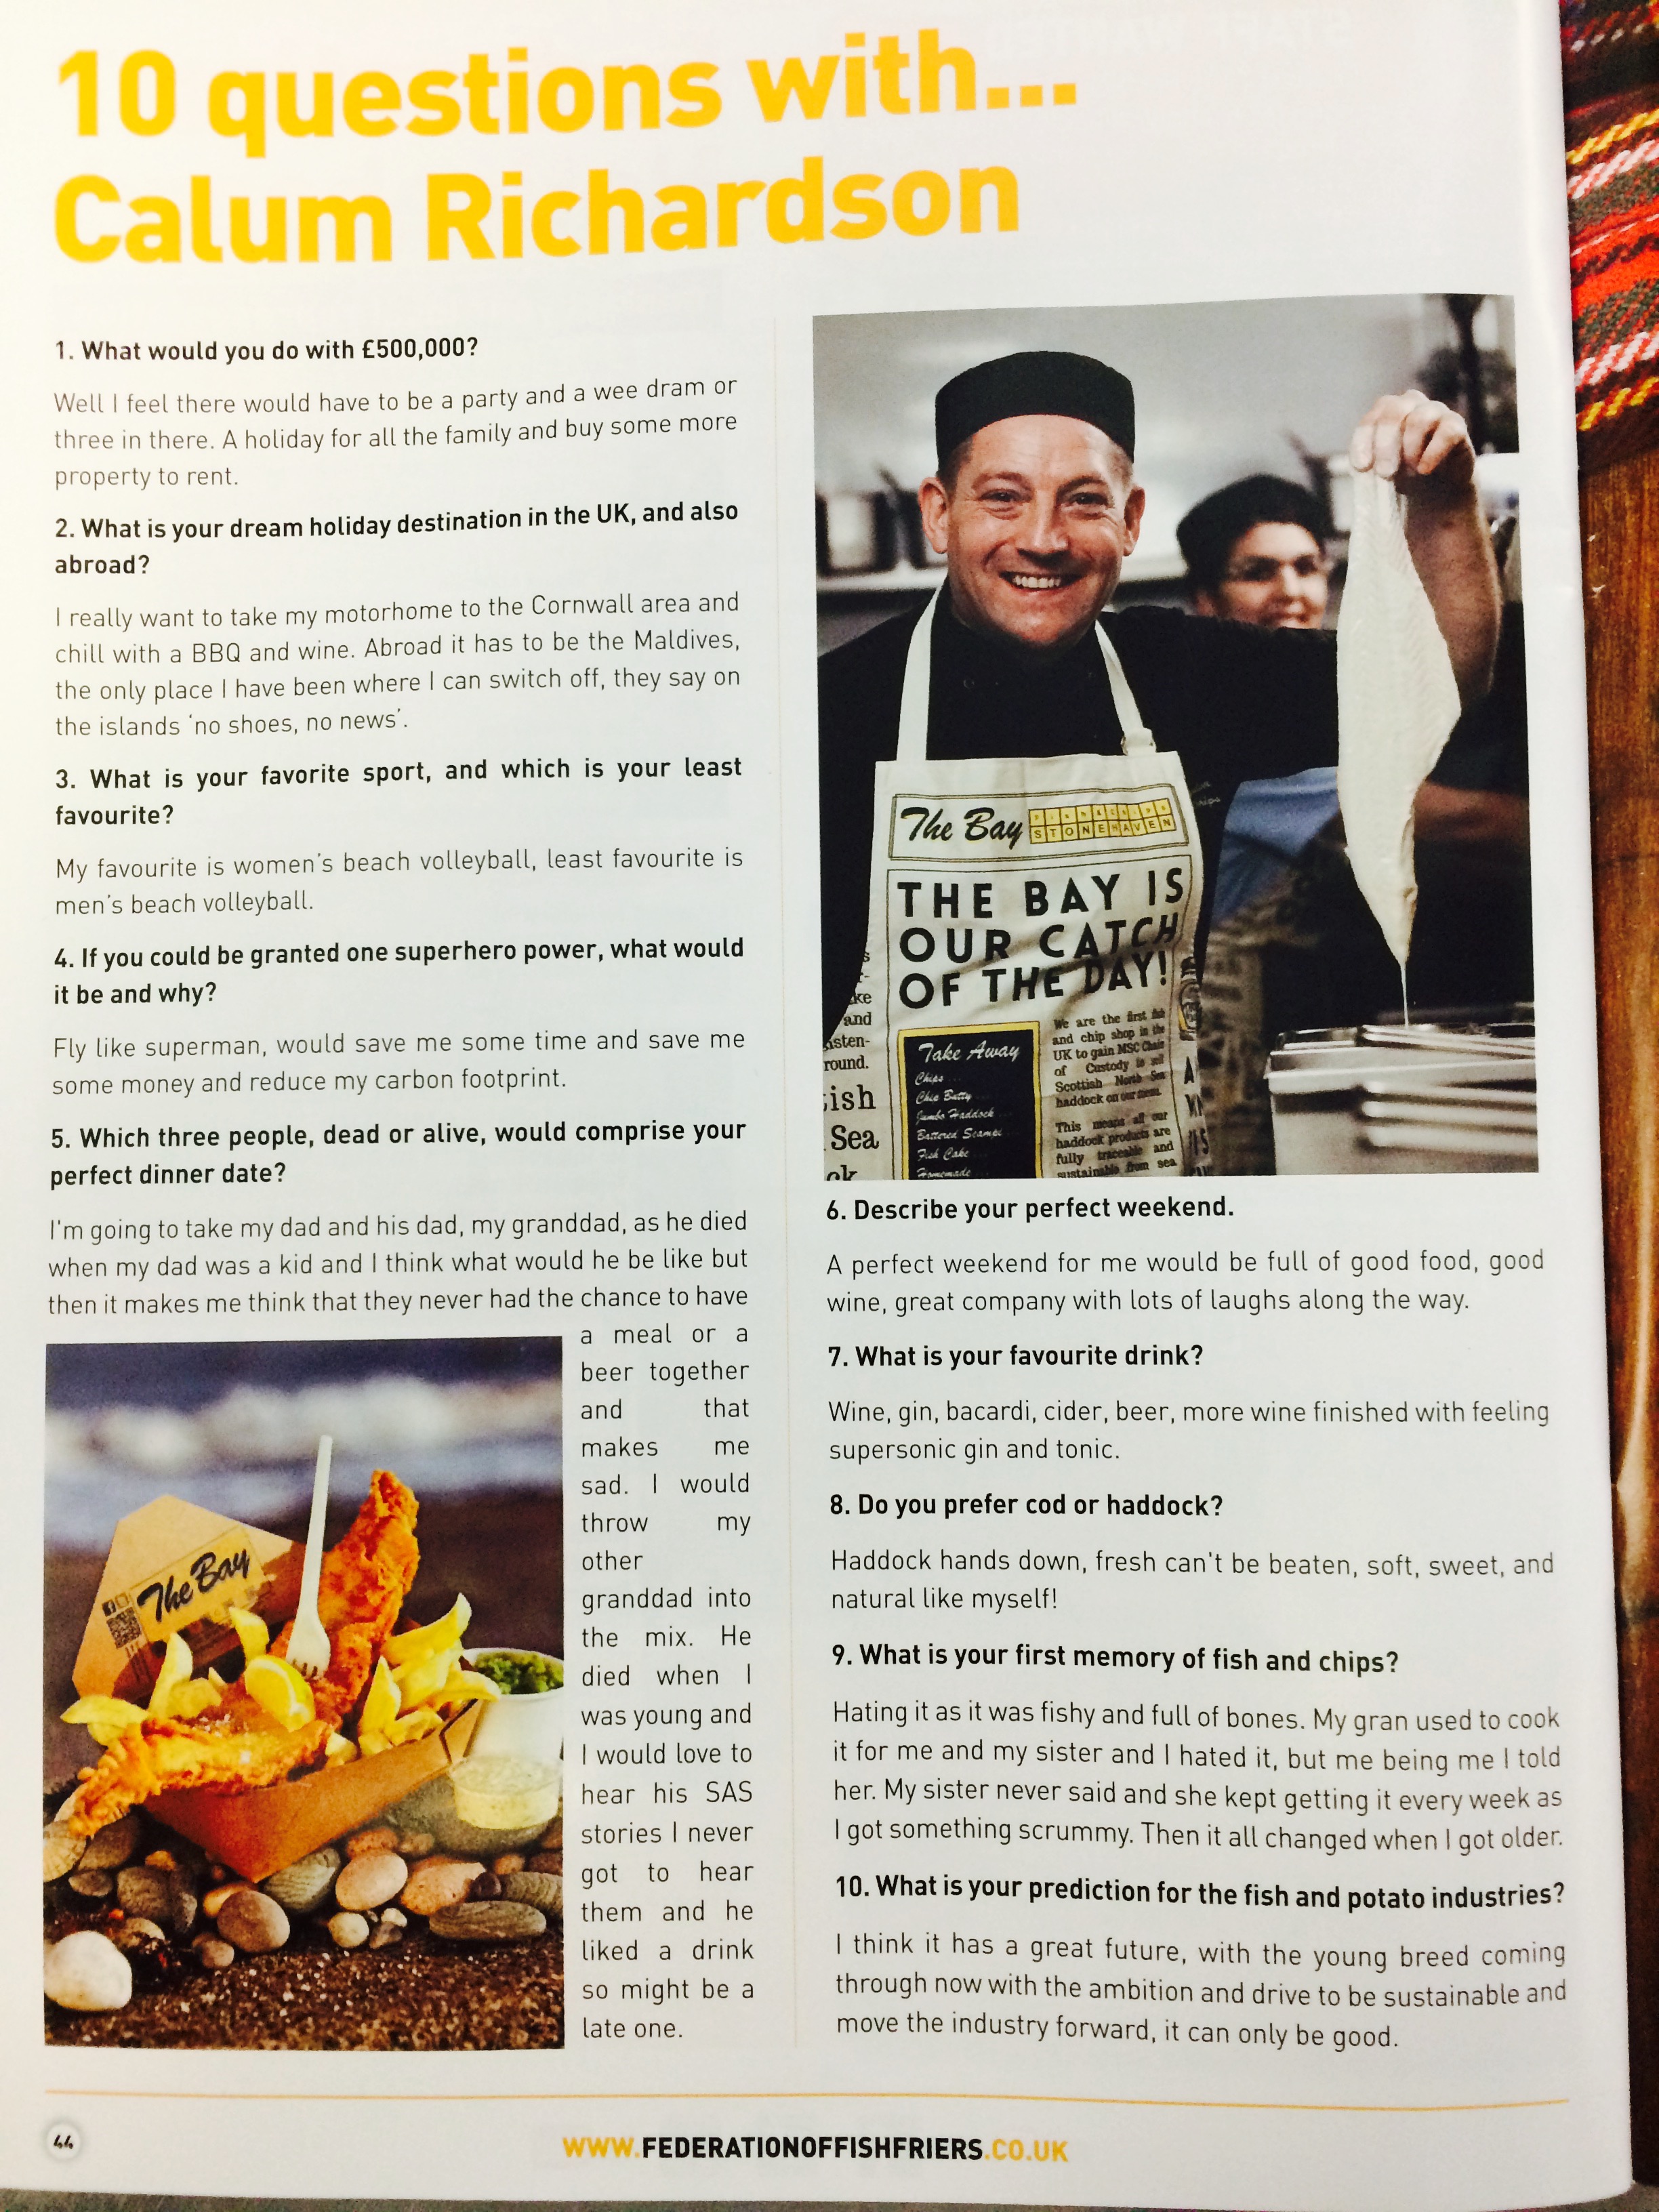 10 questions as reported in National Federation of Fish Friers